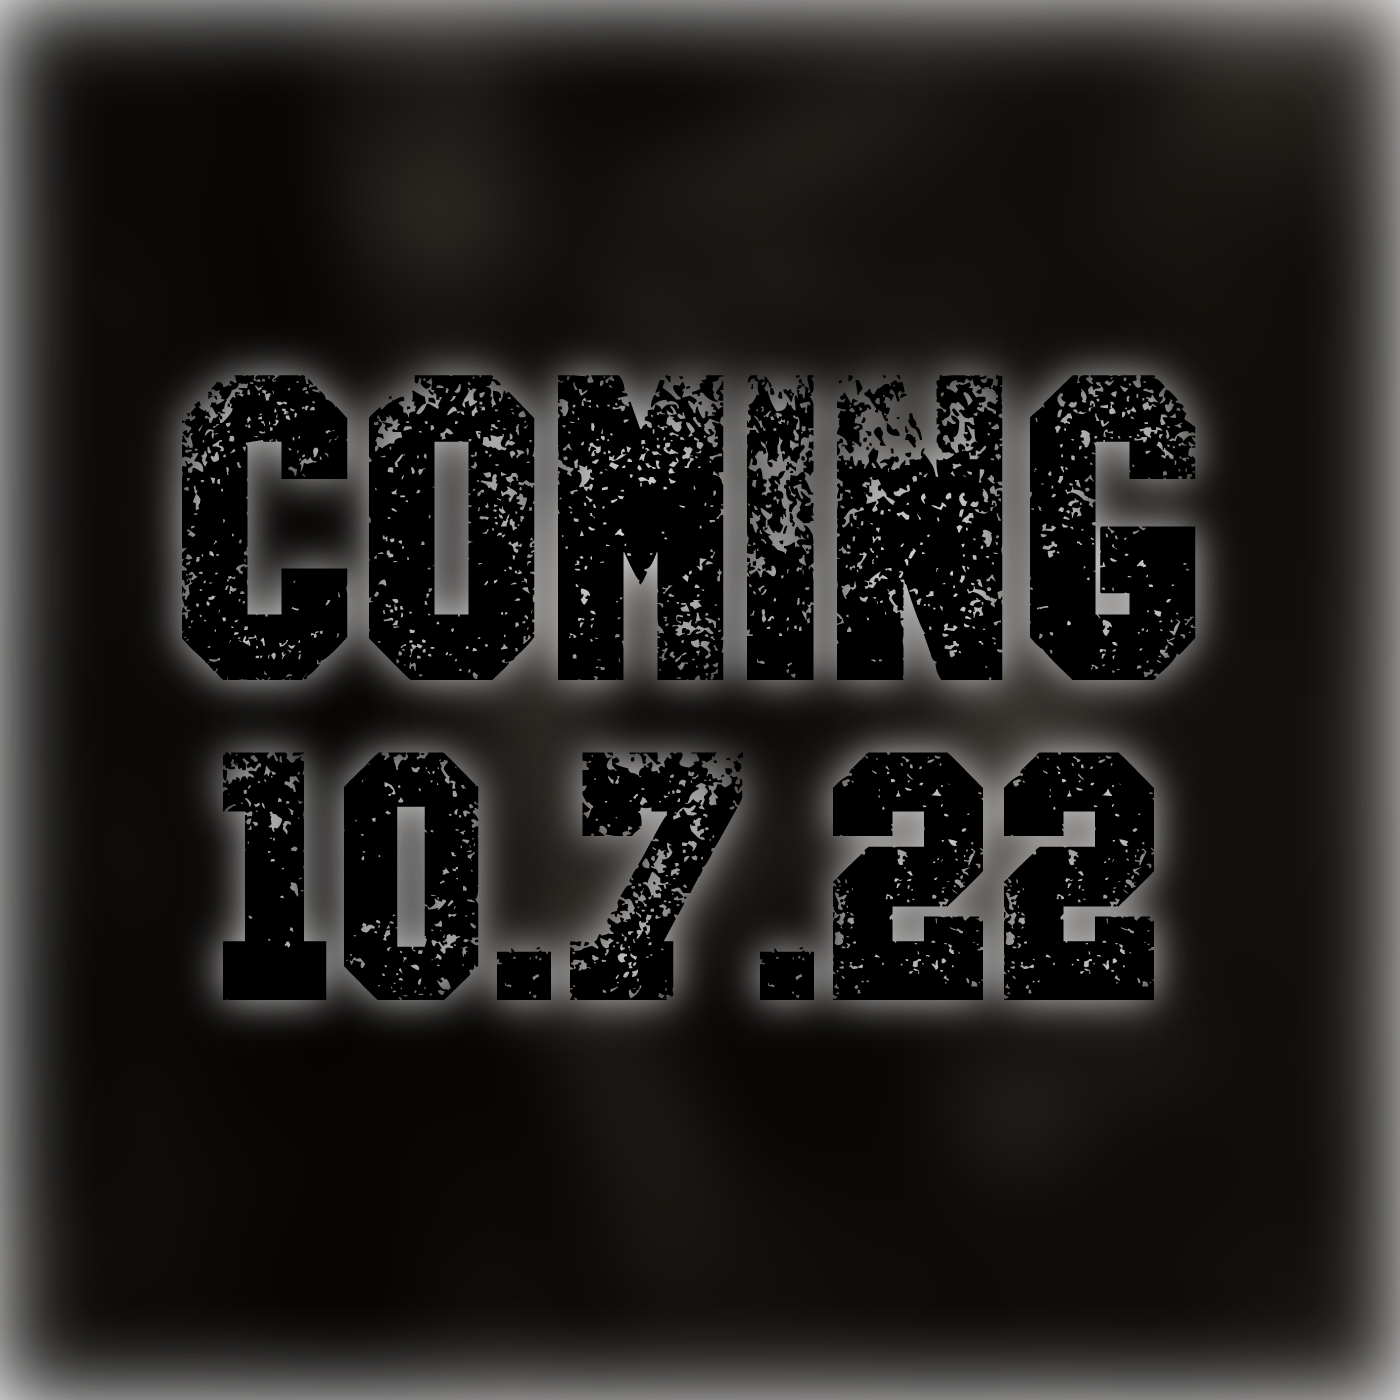 Coming 10.7.22